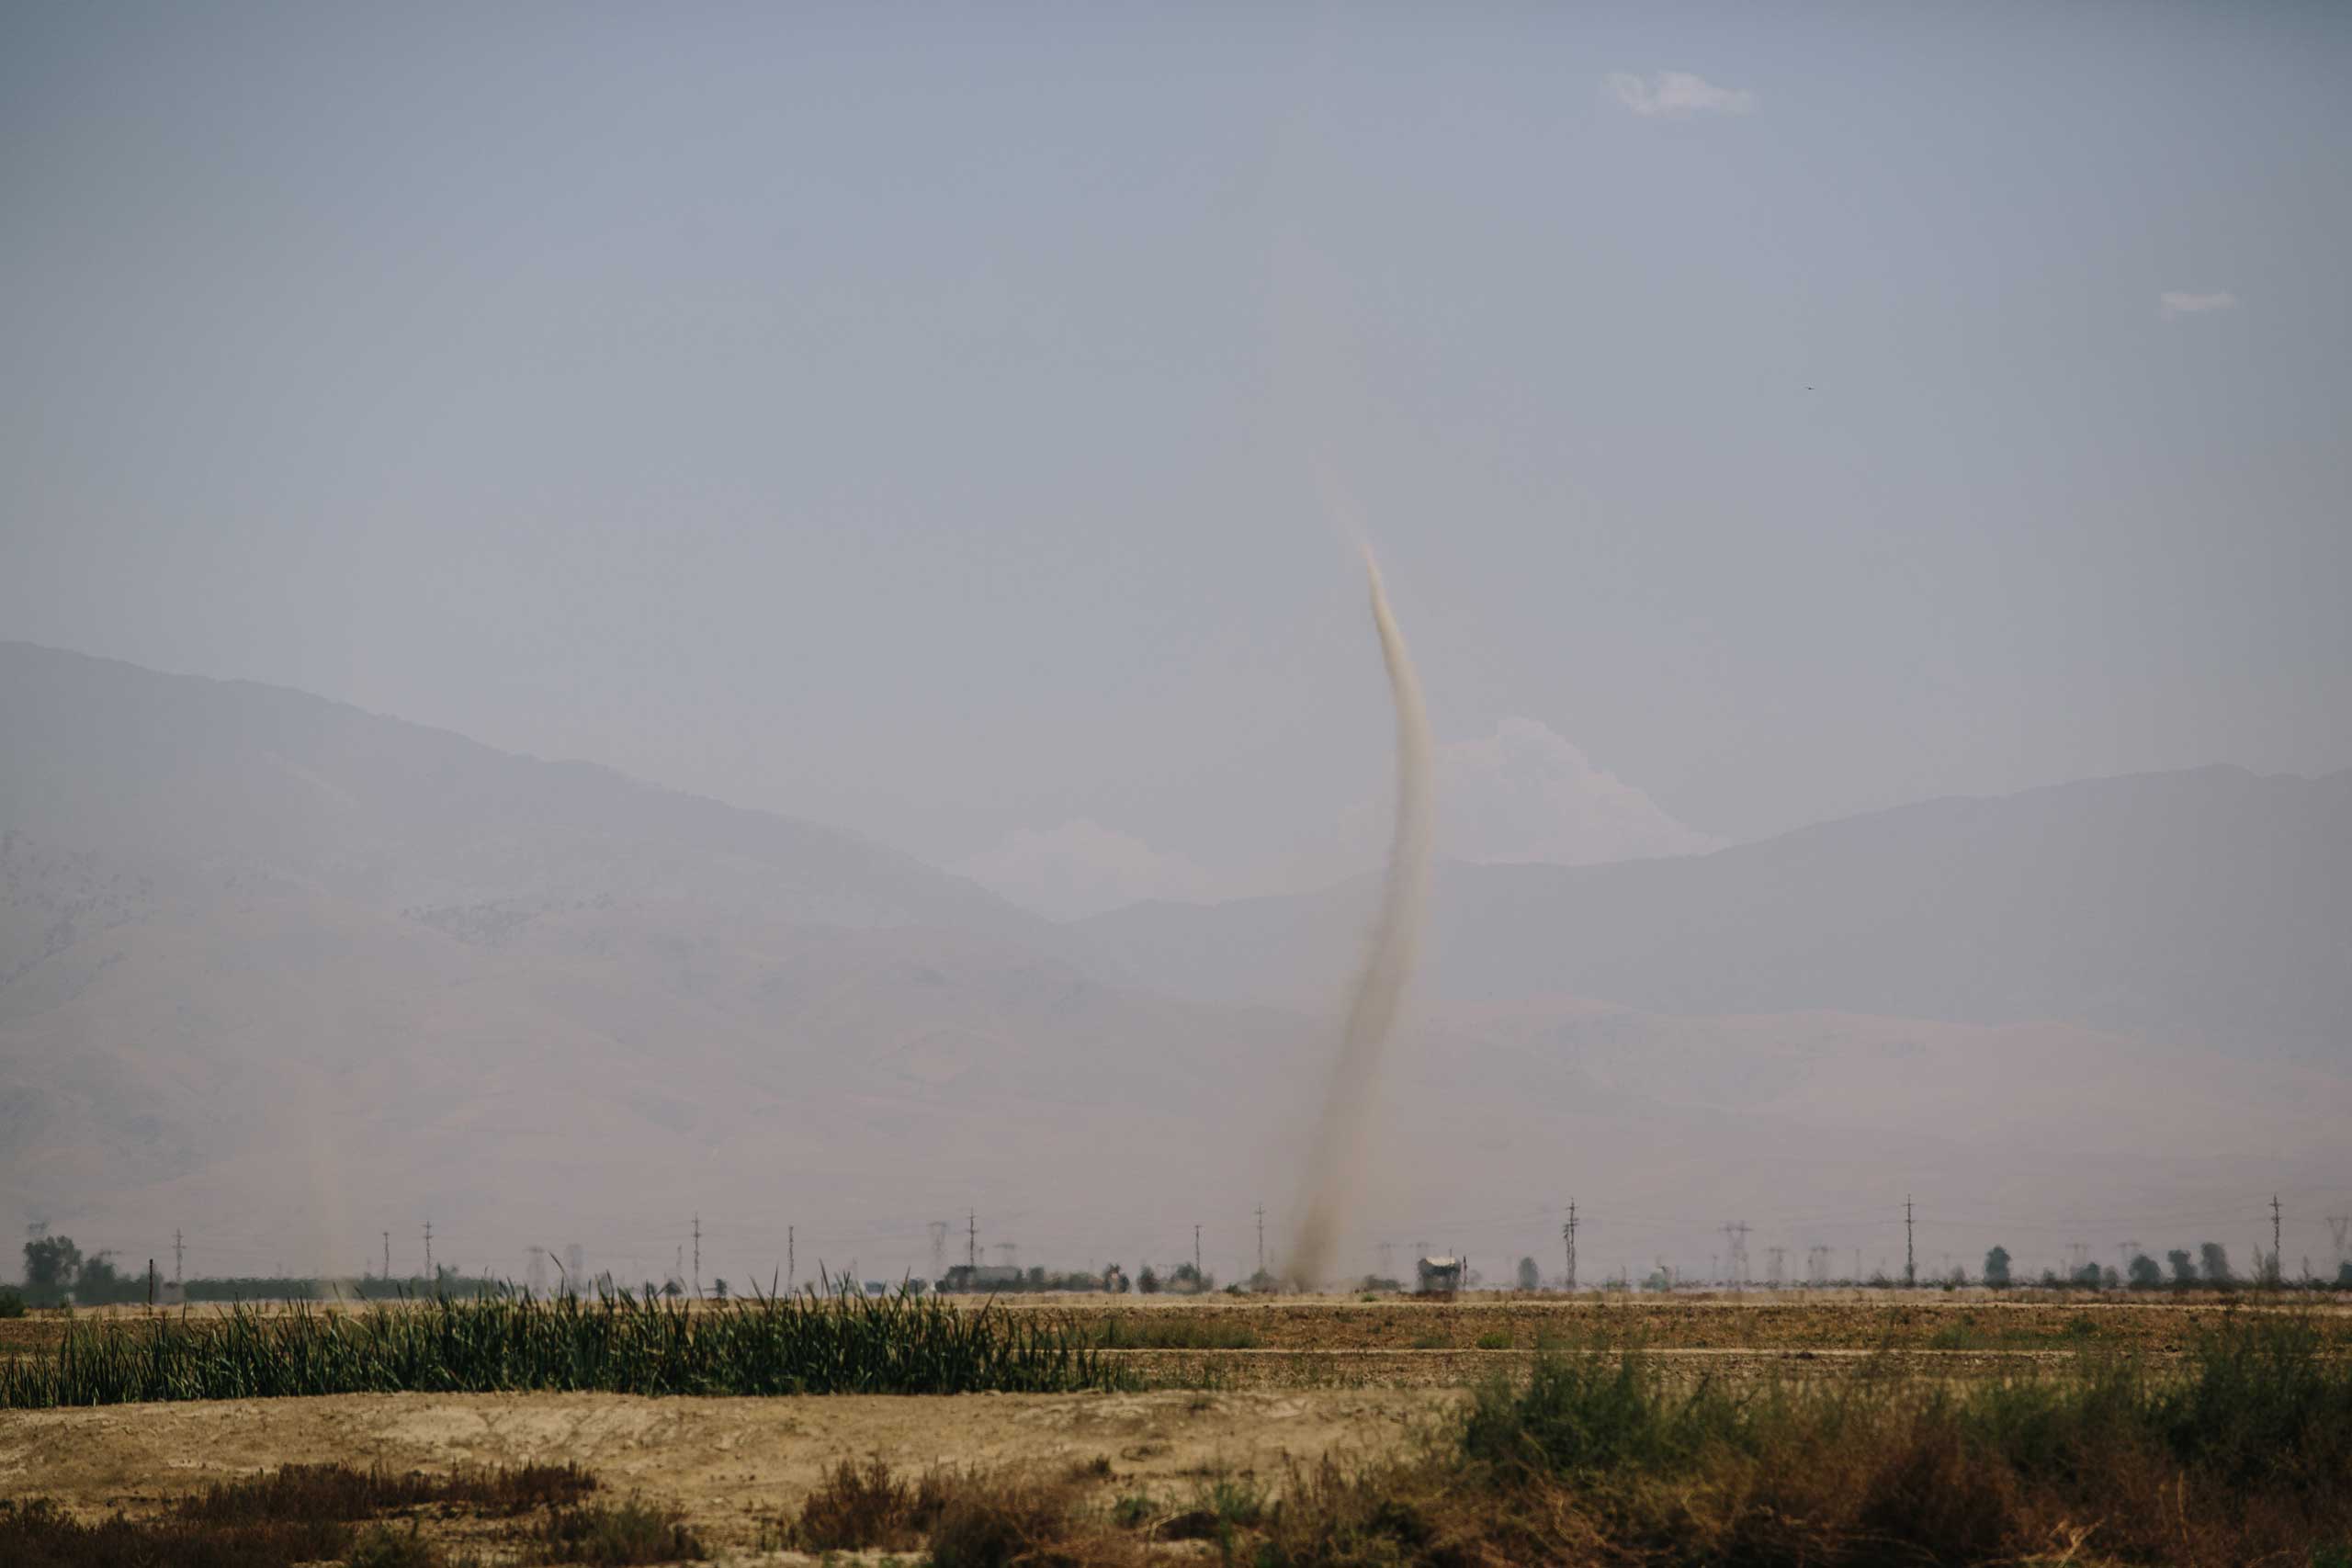 Dust devils can be seen reaching toward the sky during dry months in Bakersfield. Dust is a pervasive problem that contributes to diminished air quality. The problem is exacerbated by the current drought in California.